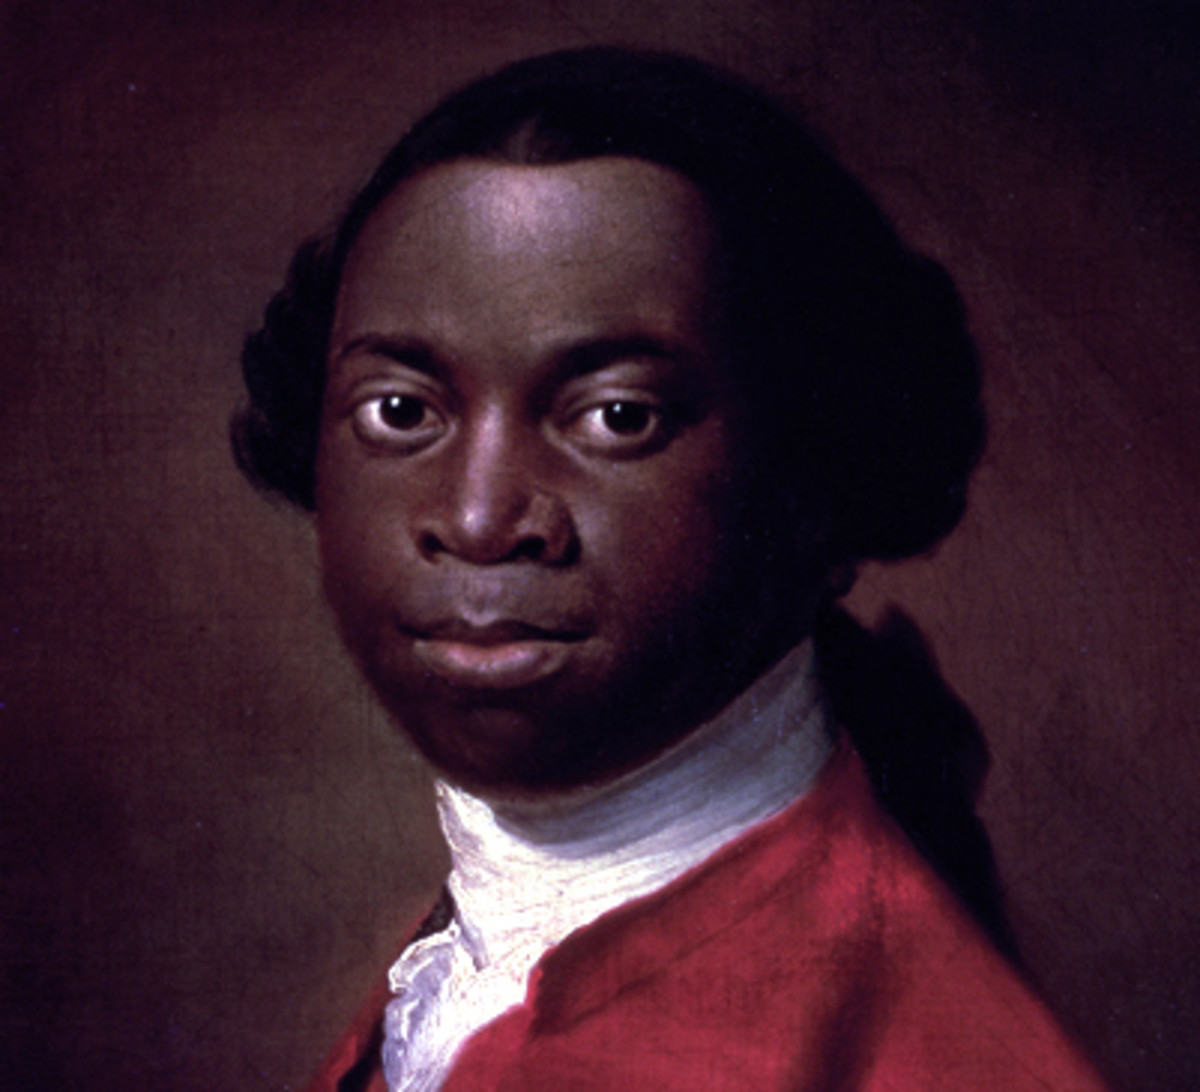 Olaudah Equiano was a prominent black Londoner involved in the struggle to end slavery